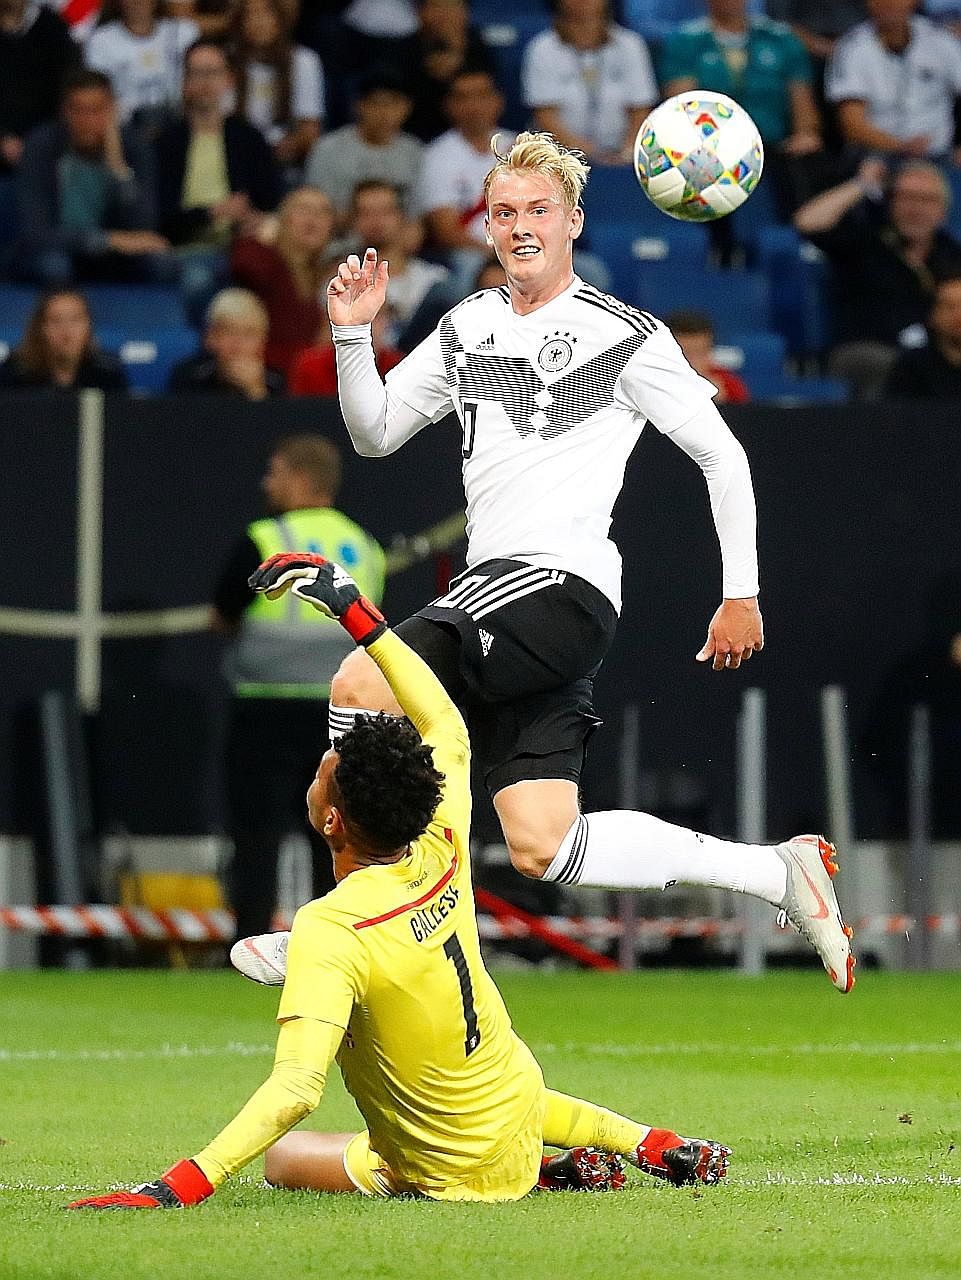 Germany's Julian Brandt lifting the ball over Peruvian goalkeeper Pedro Gallese to score their first goal during their international friendly. The Germans won 2-1 as they continued their rehabilitation following their group-stage exit at the World Cu